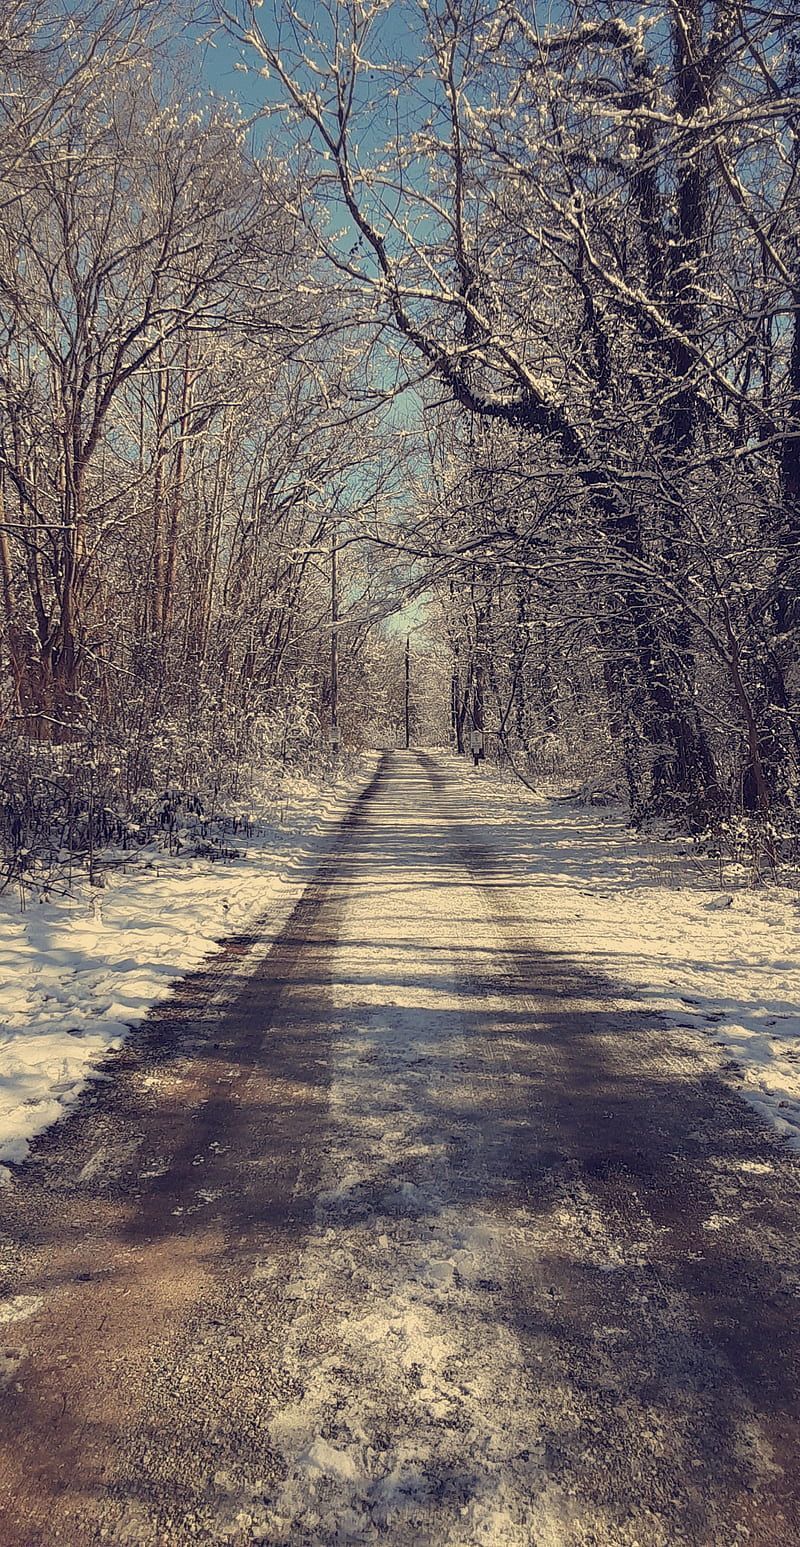 A road that is covered in snow - White Christmas